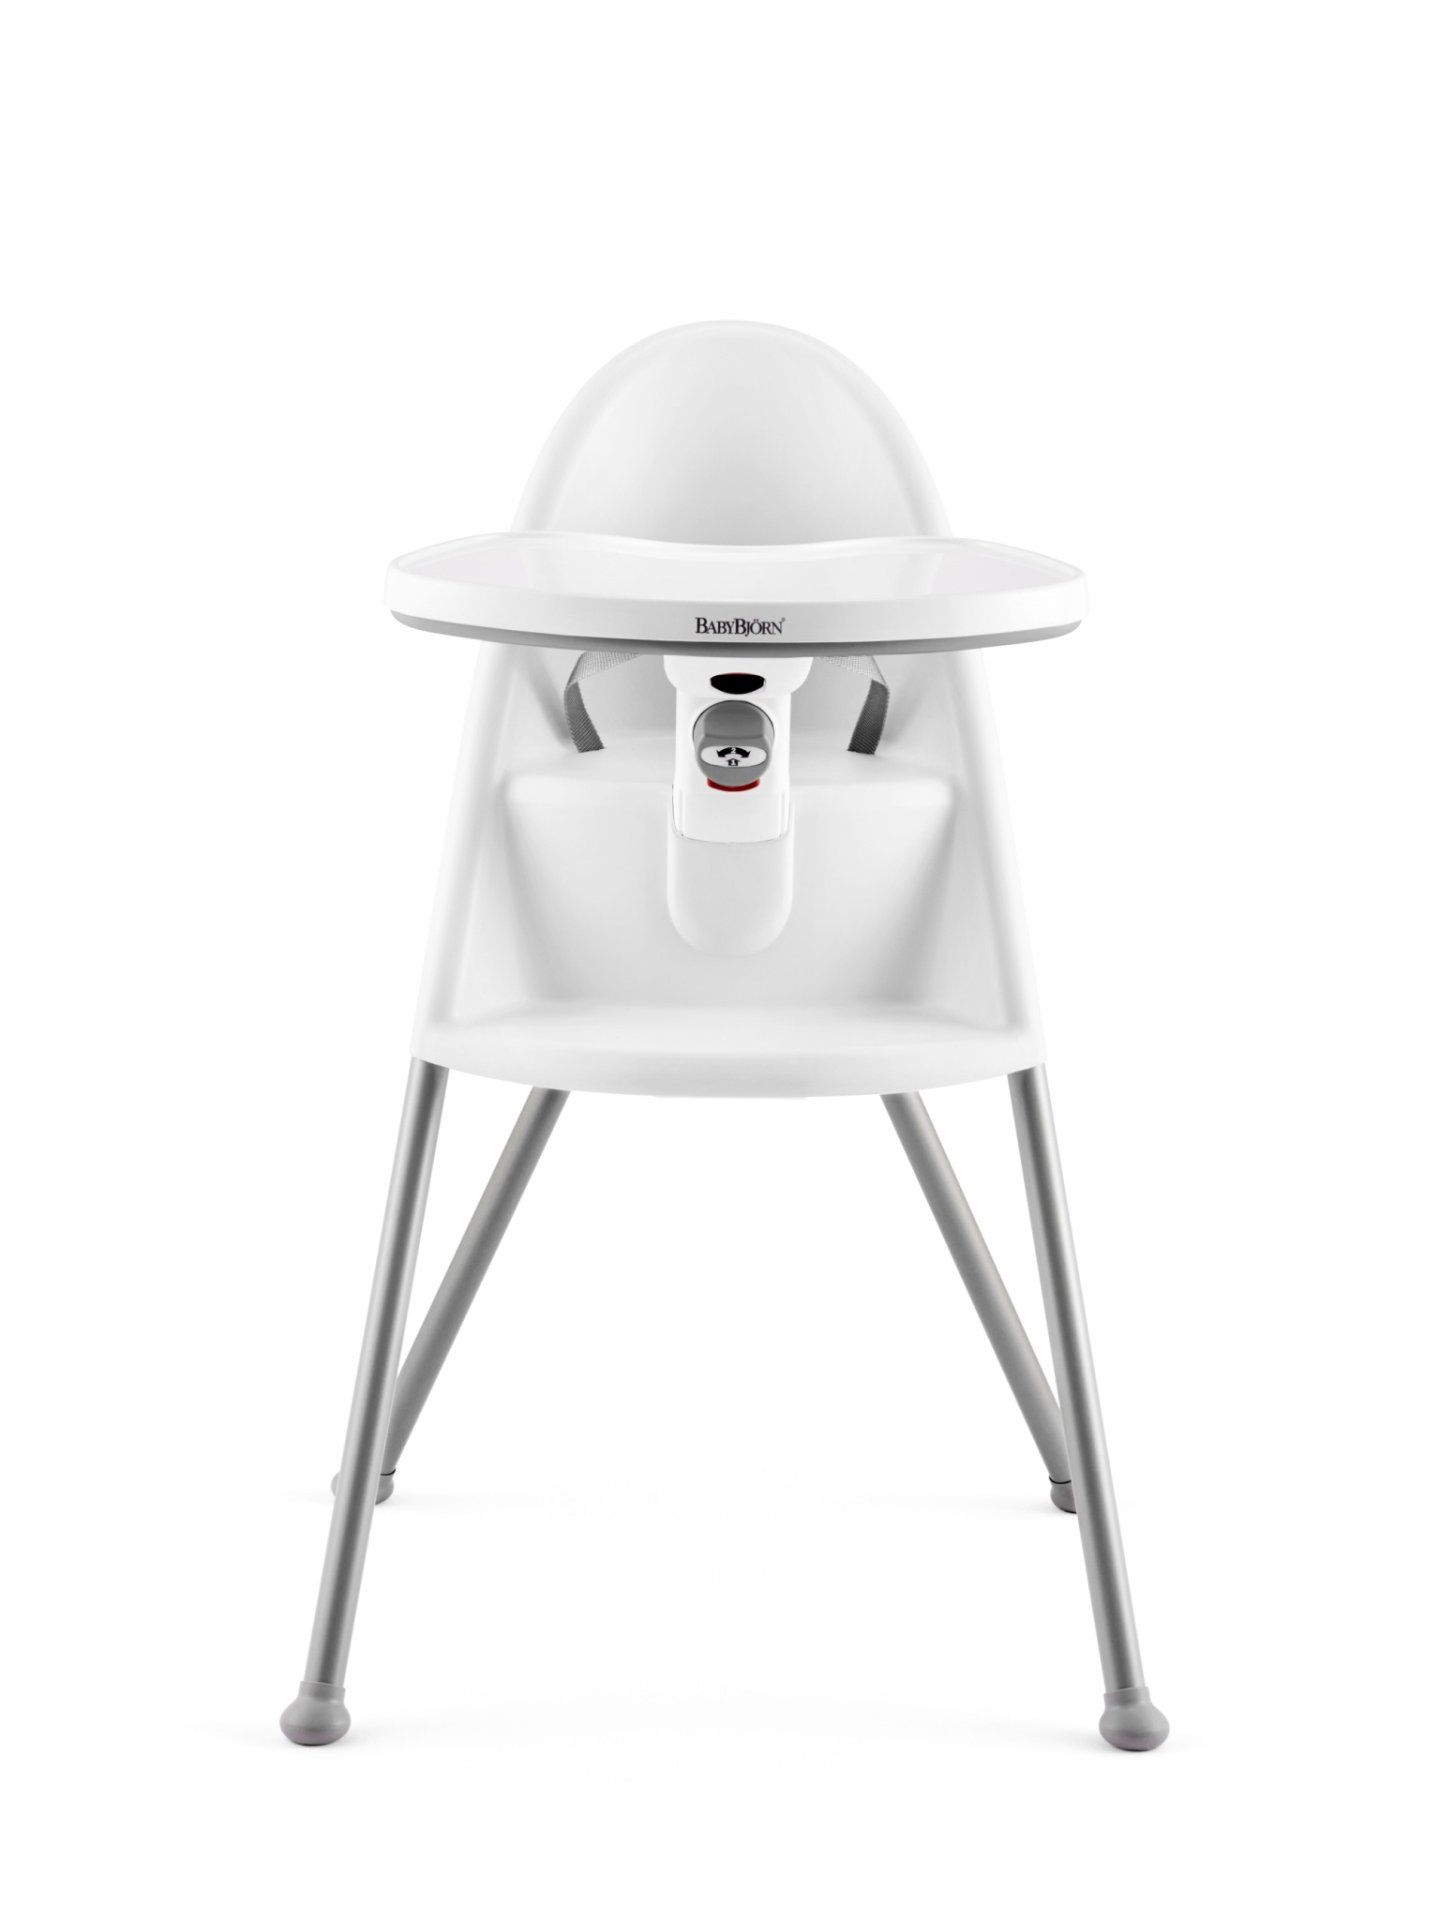 Boxed Baby Bjorn Highchair RRP £200 (1287956) (Pictures Are For Illustration Purposes Only) (